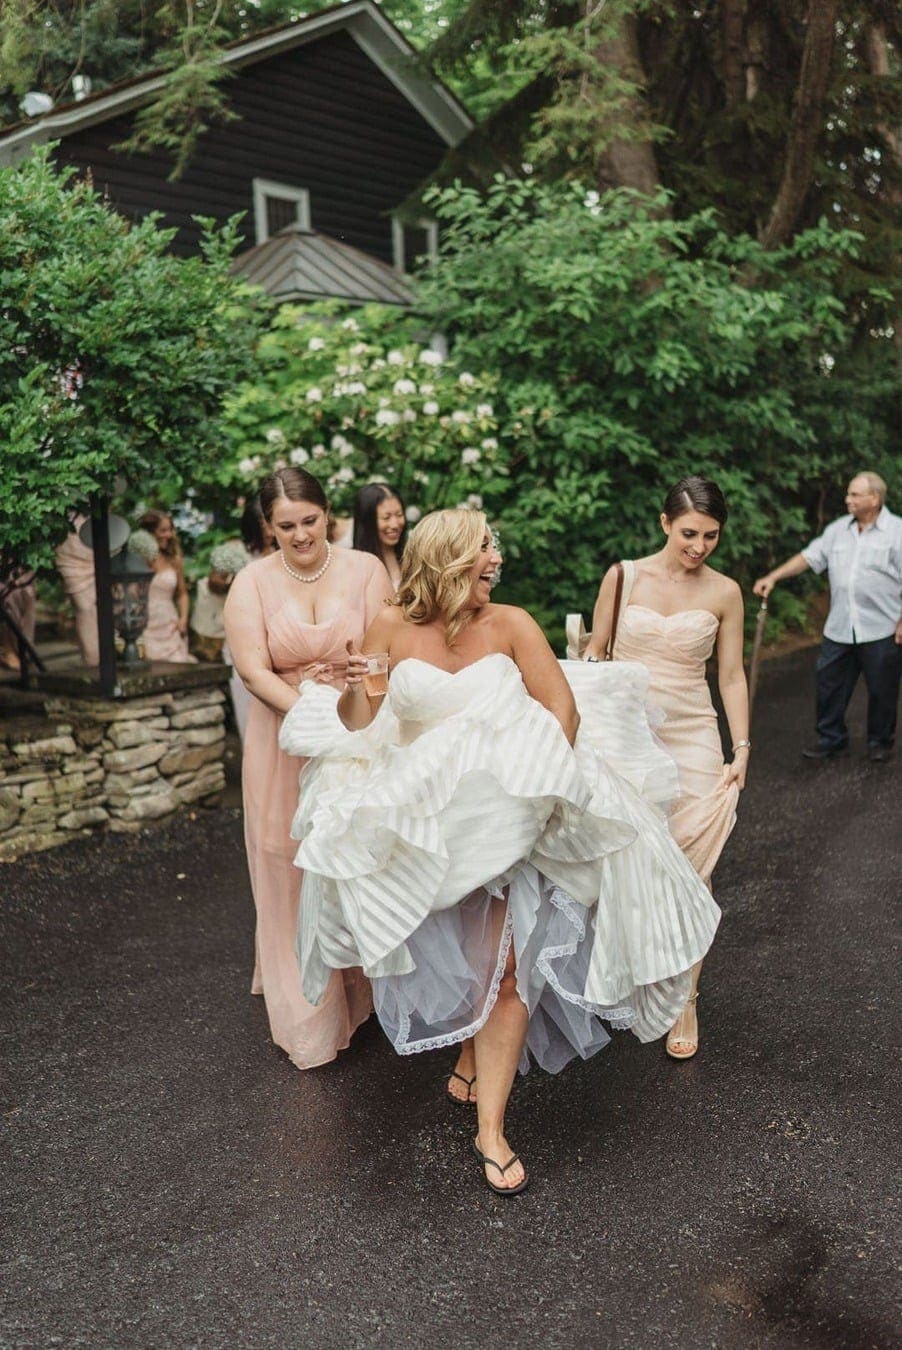 Bride smiles as she and bridesmaids lift up her wedding dress dress